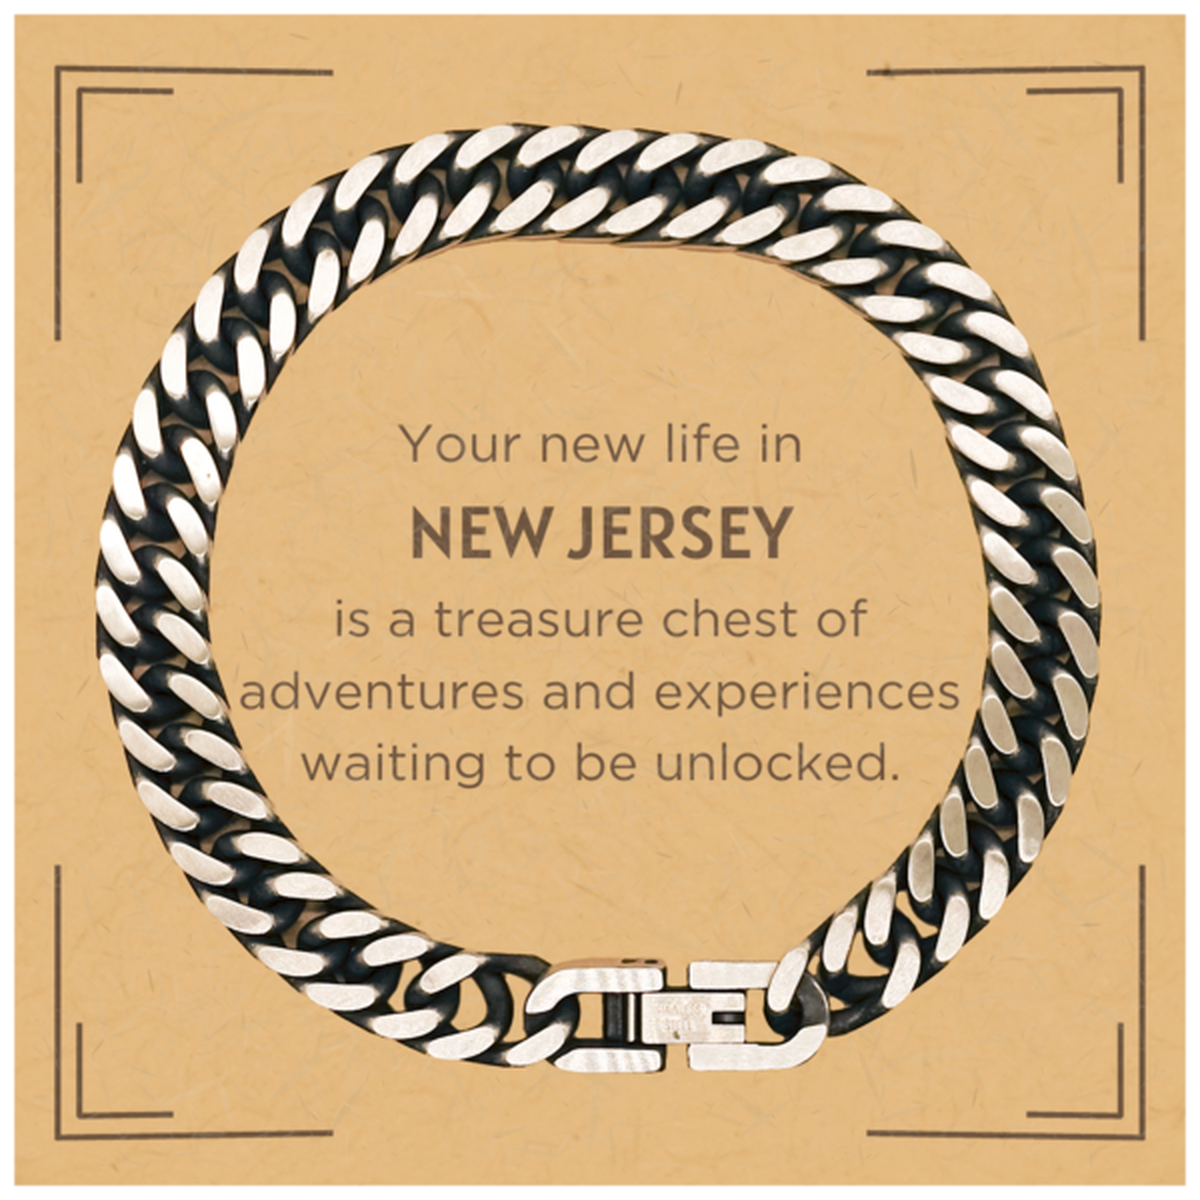 Moving to New Jersey Gifts, Your new life in New Jersey, Long Distance New Jersey Christmas Cuban Link Chain Bracelet For Men, Women, Friends, Coworkers